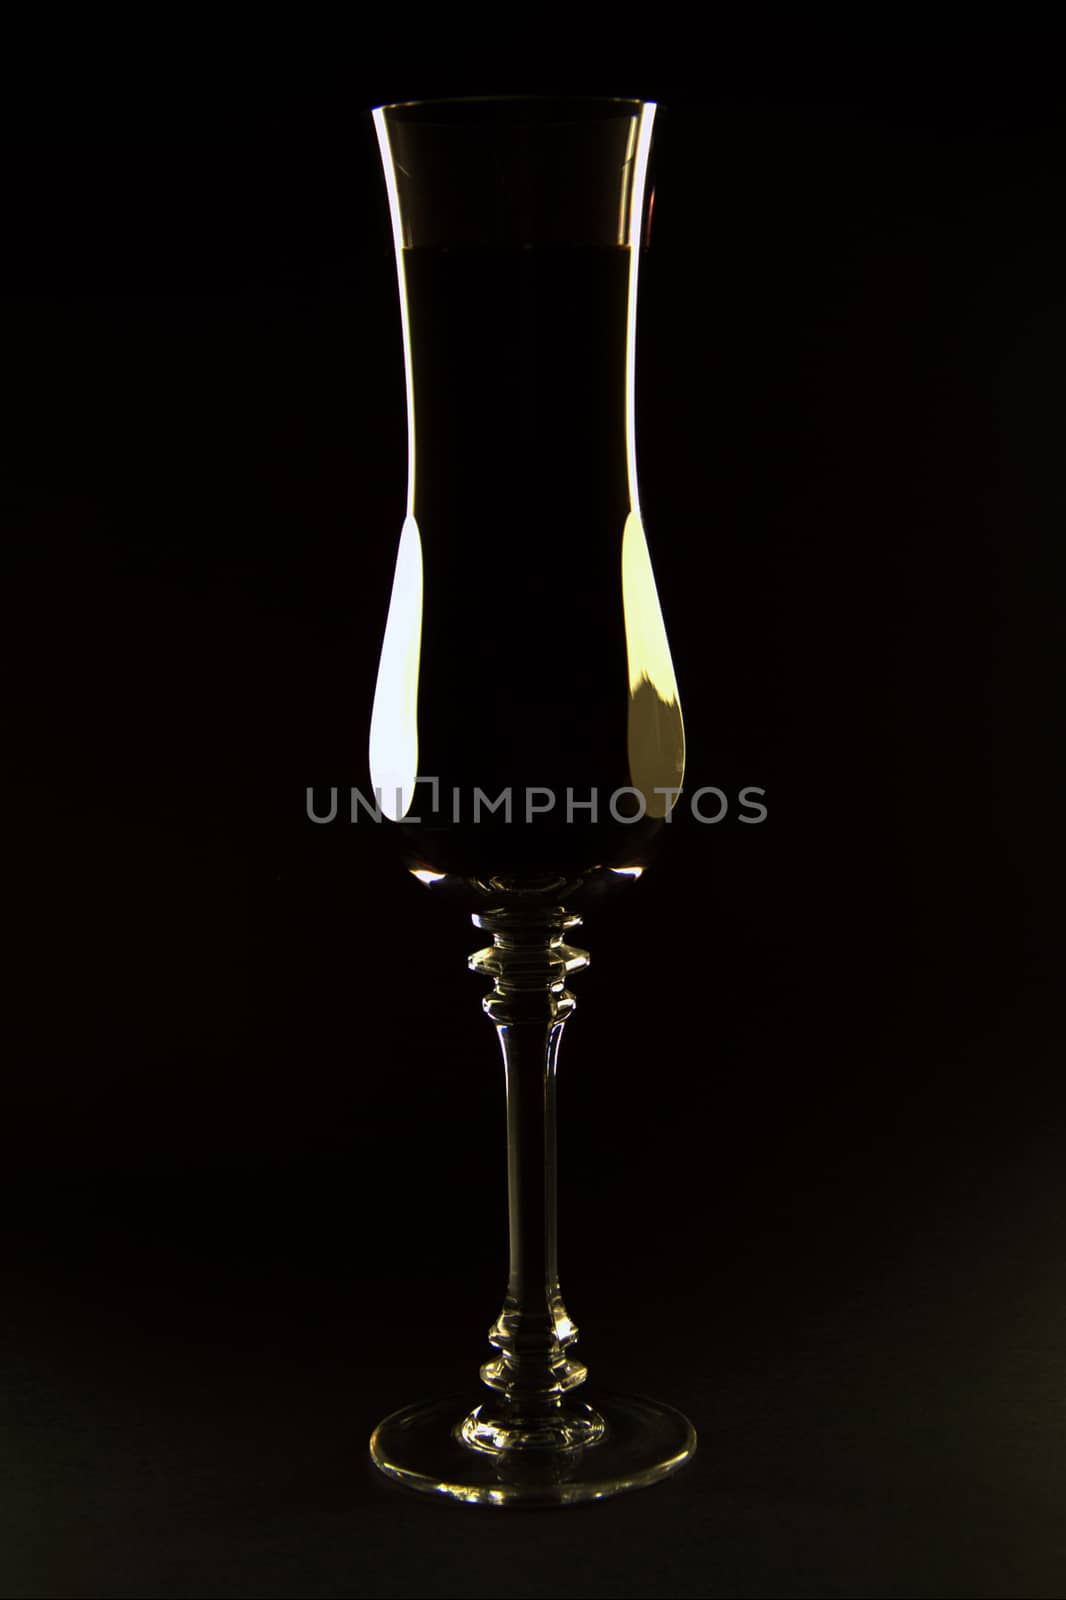 Natural silhouette from cast light on the edges of a tall champagne glass or flute.